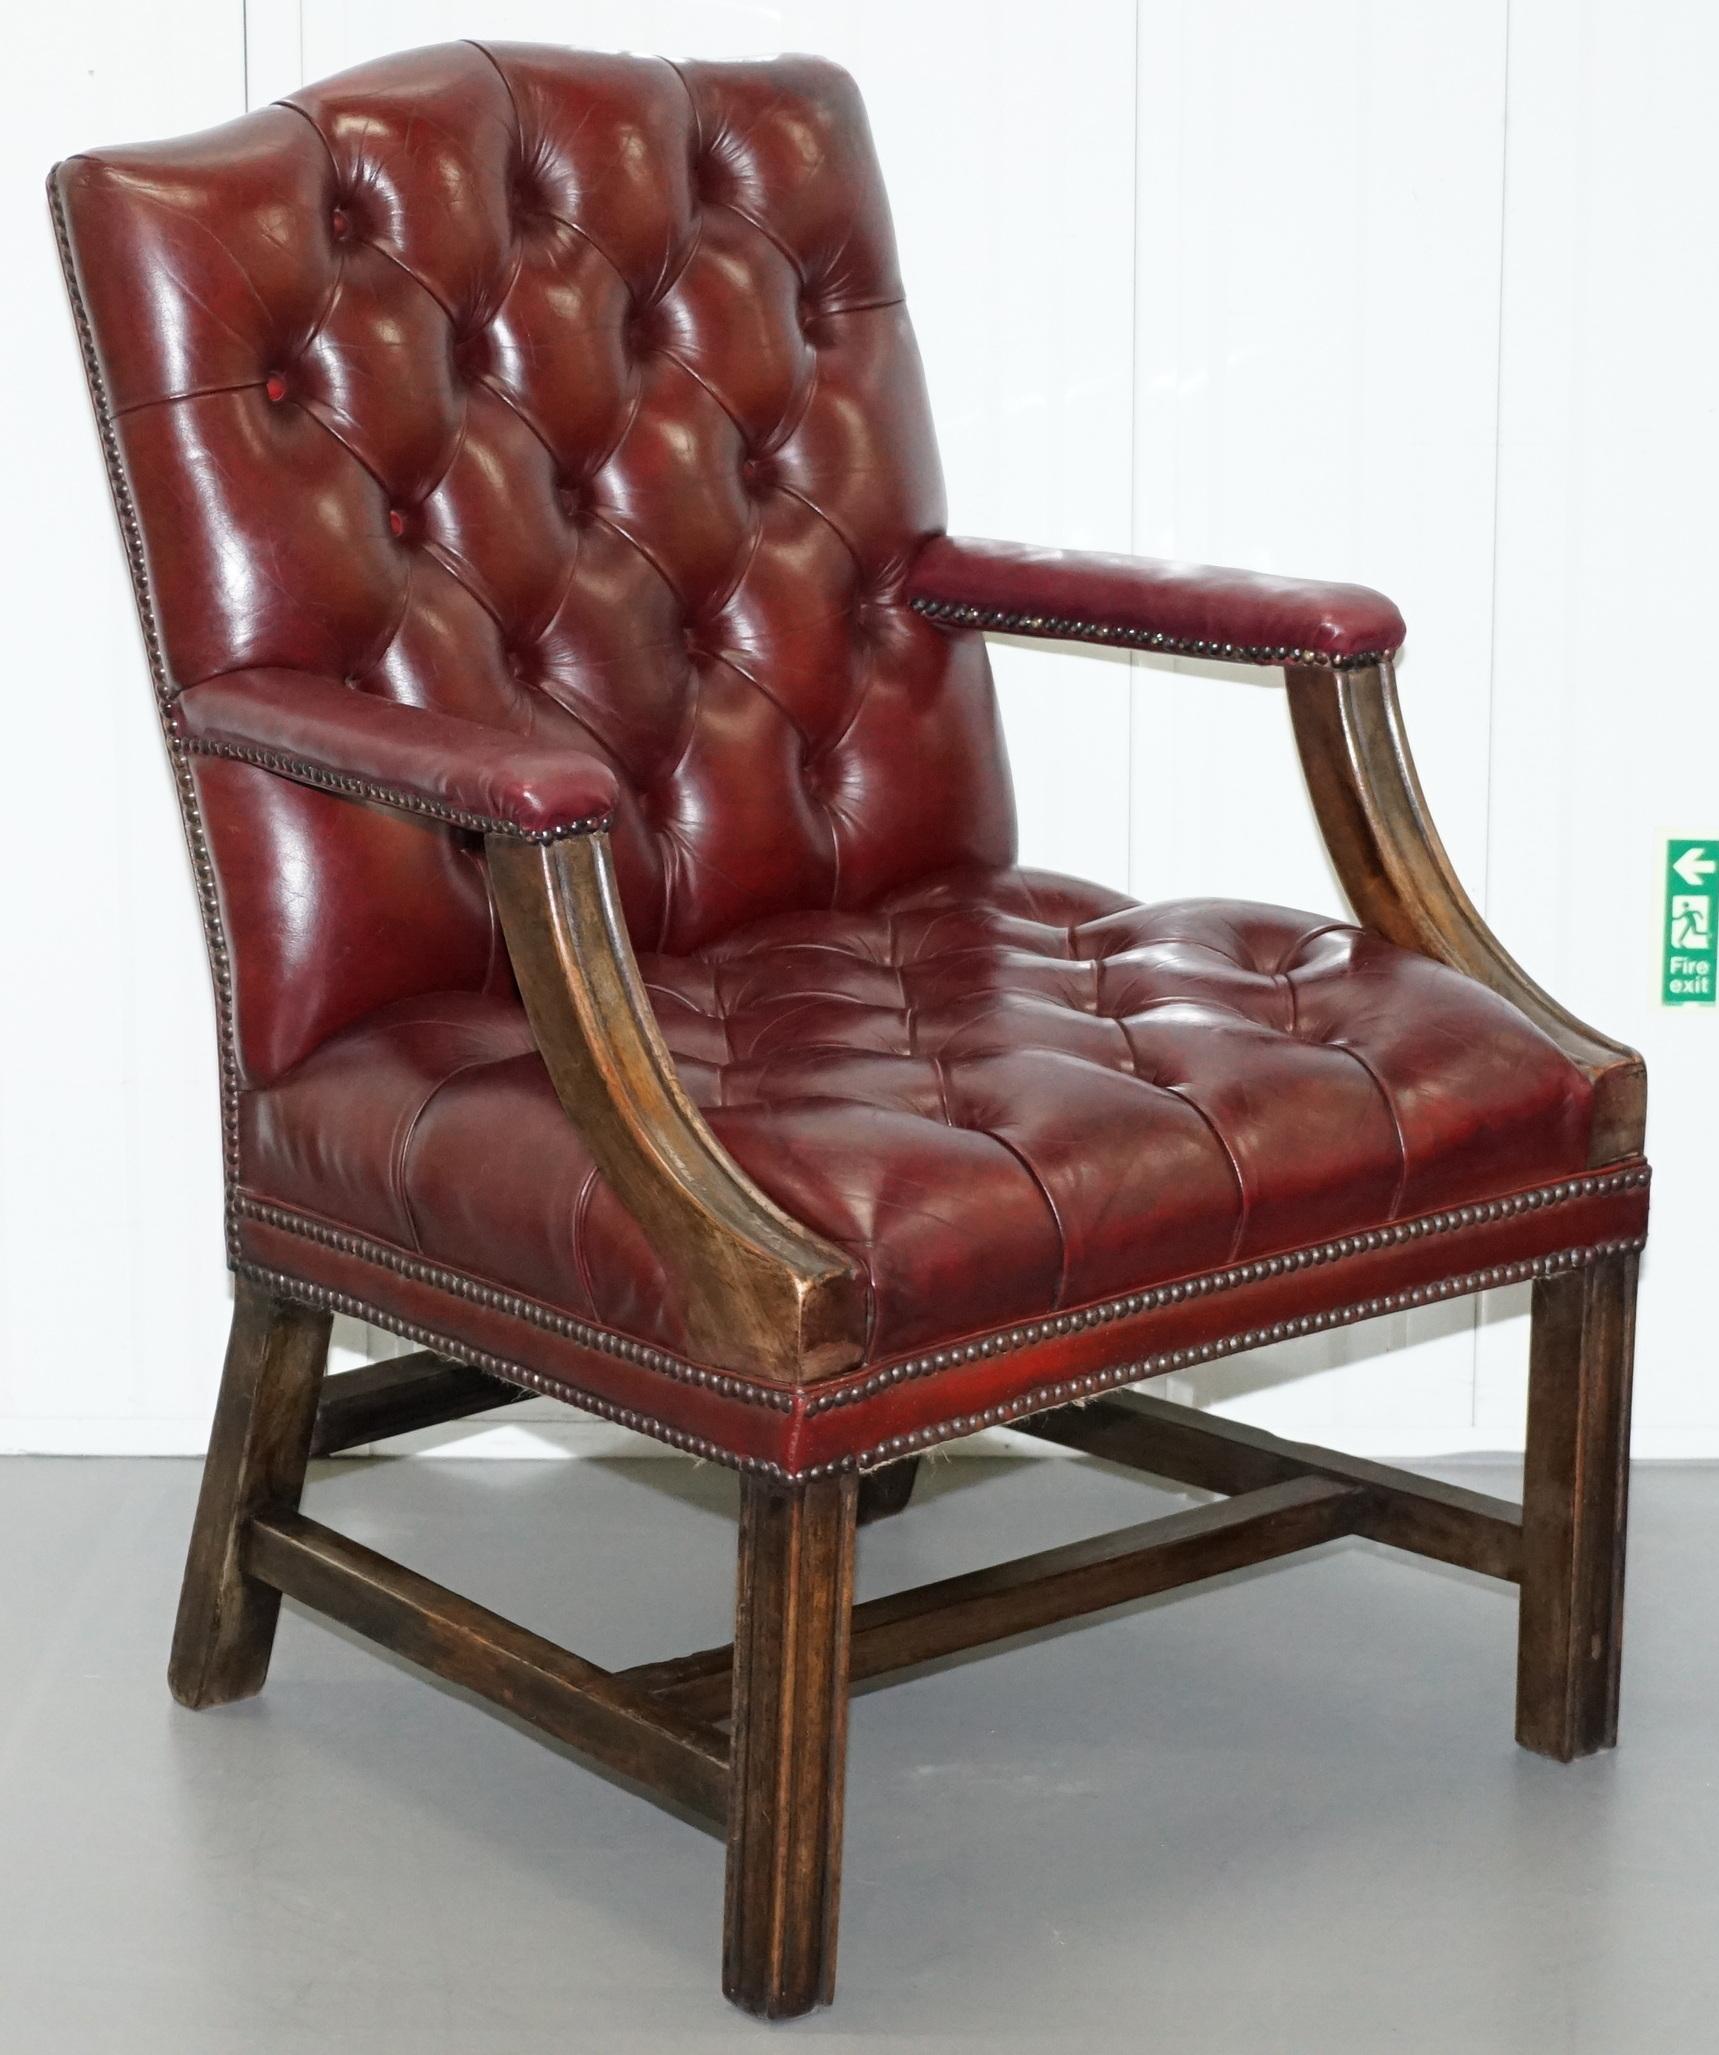 We are delighted to this stunning pair of Chesterfield Gainsborough carver armchairs in oxblood leather with hand carved mahogany H frames made by MillBrook furniture 

Please note the delivery fee listed is just a guide, it covers within the M25